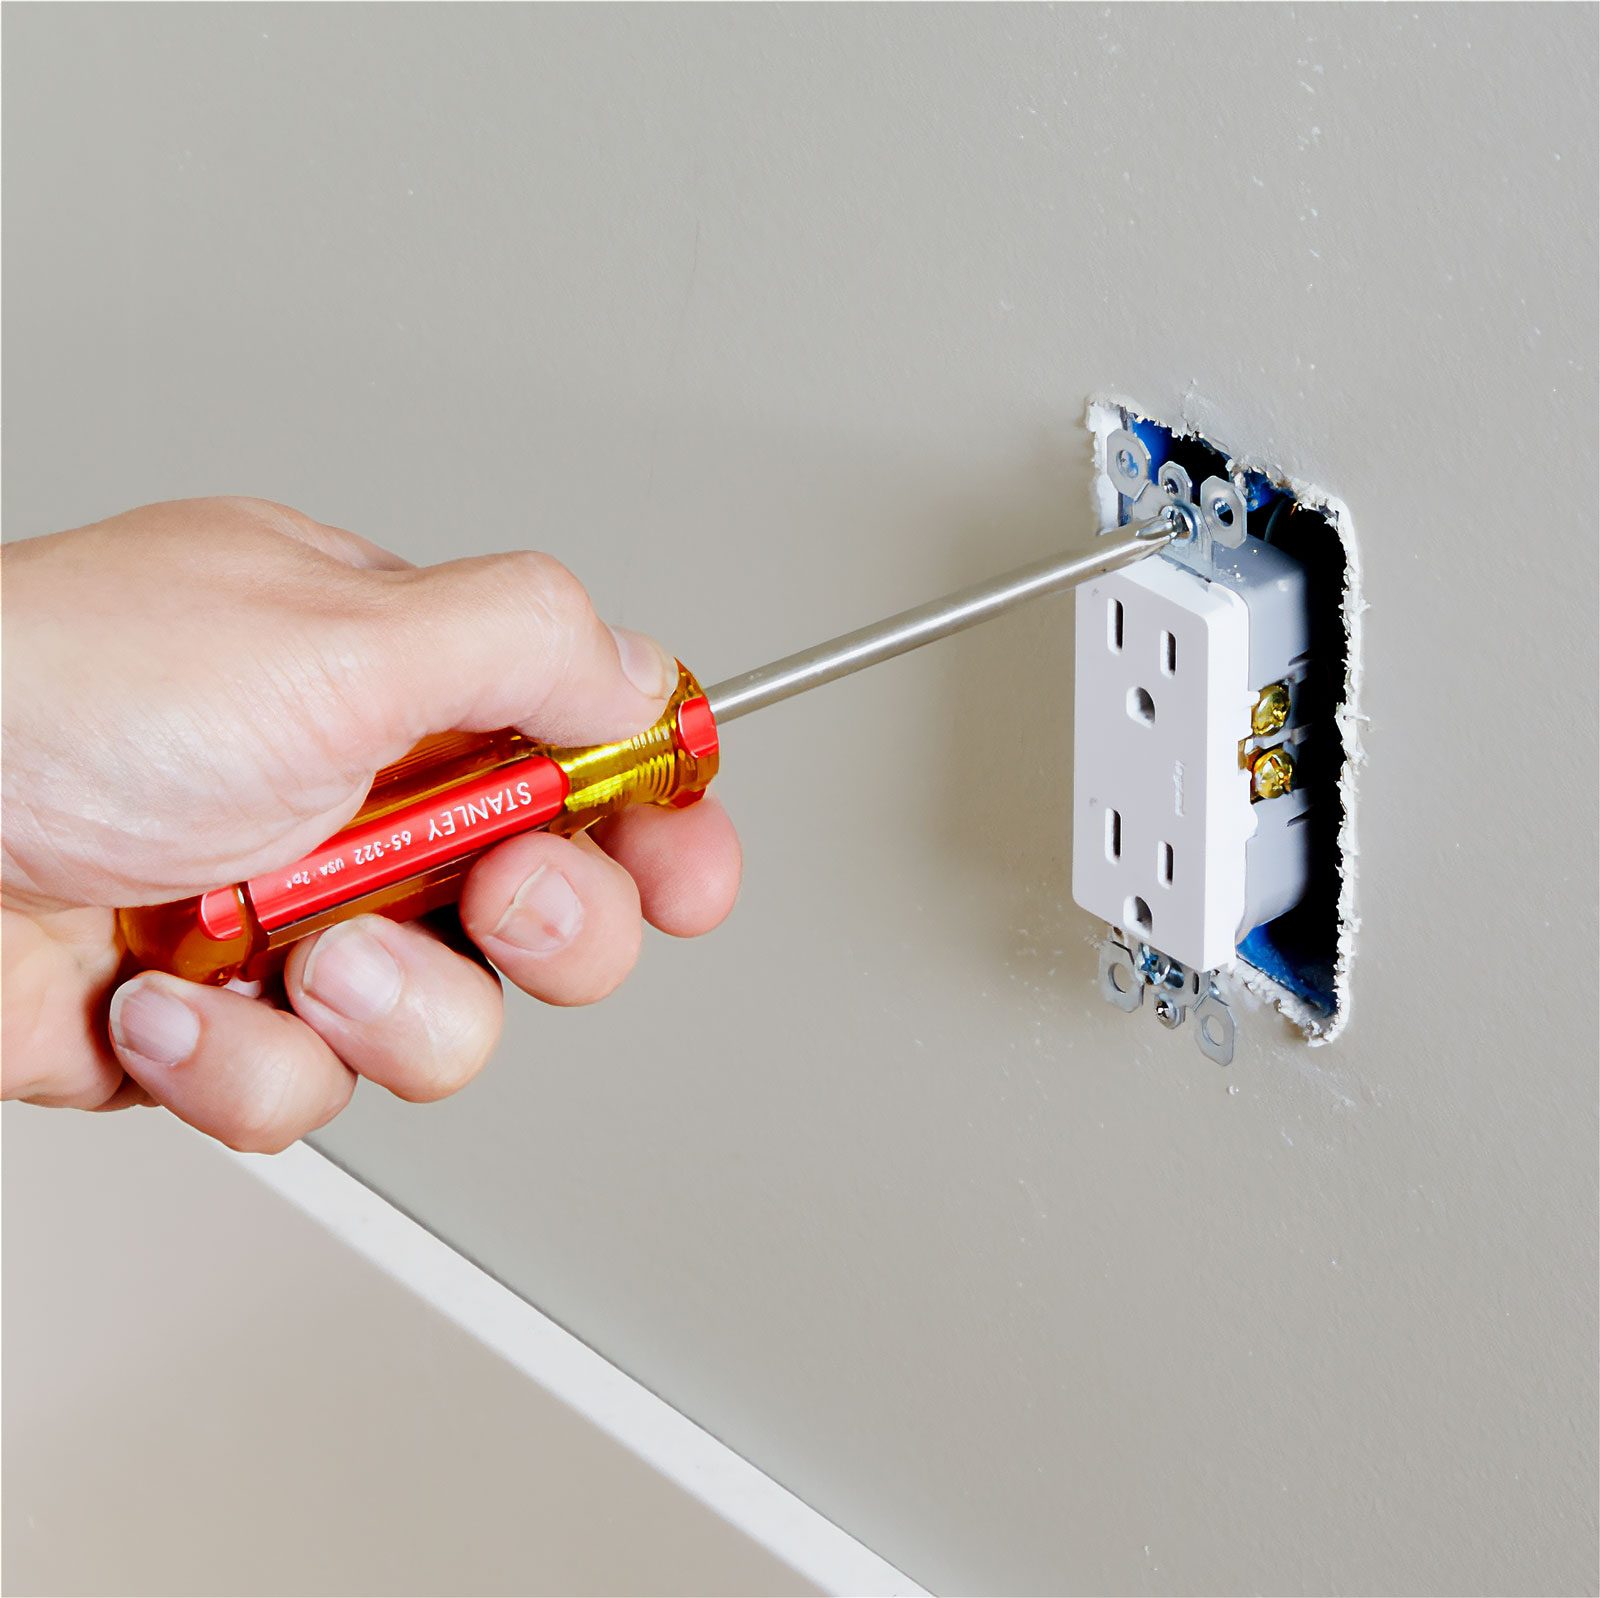 14 Common Mistakes DIYers Make With Electrical Projects